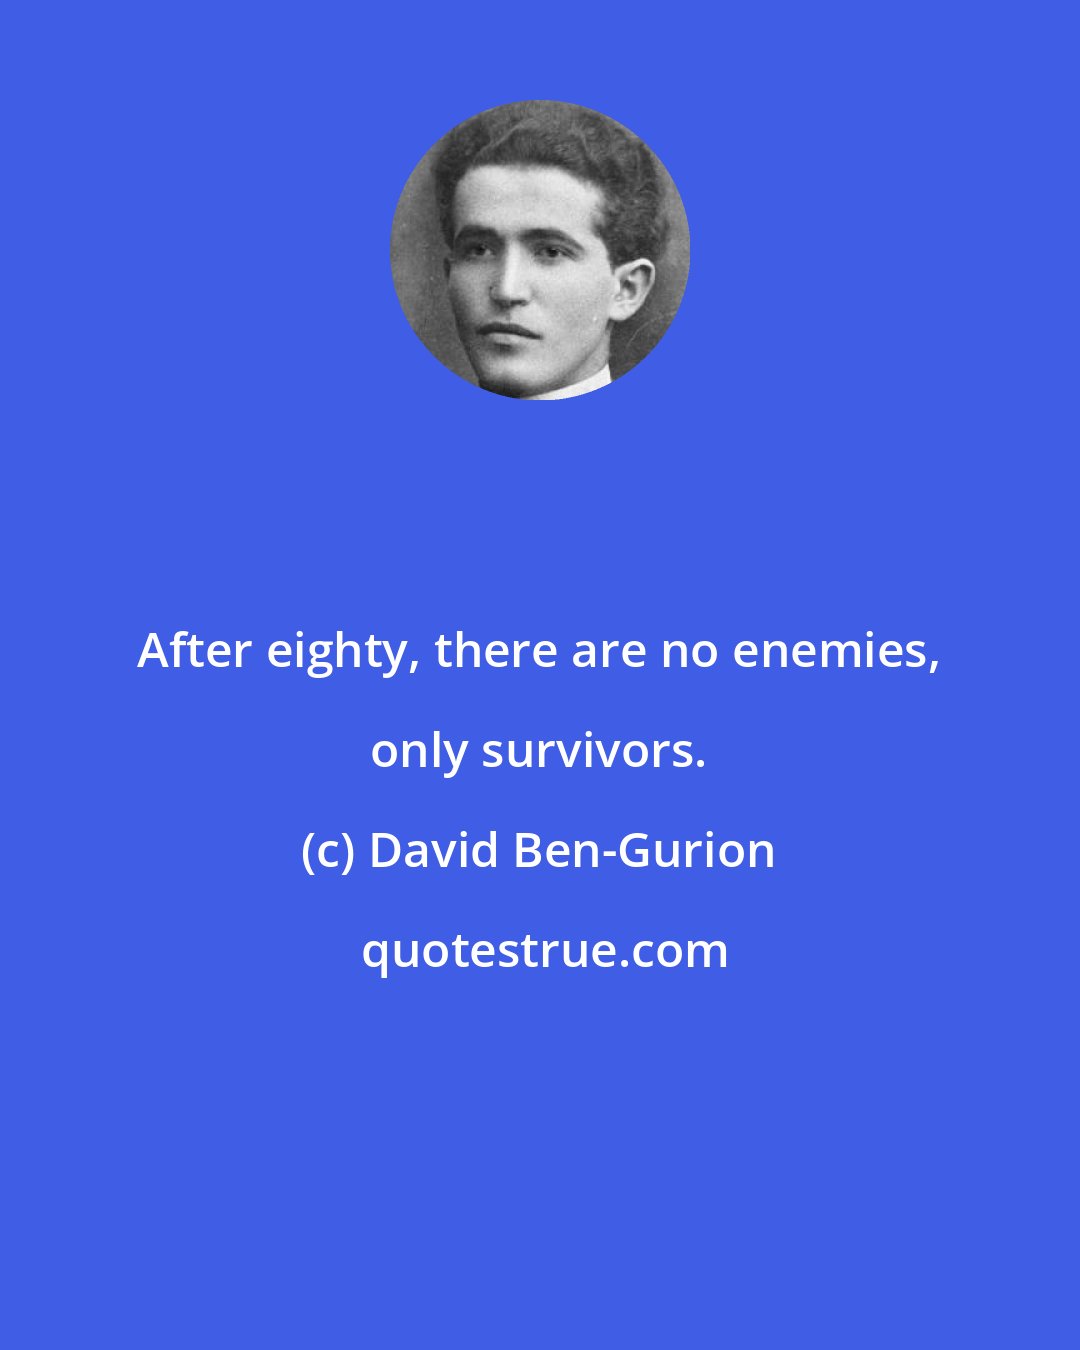 David Ben-Gurion: After eighty, there are no enemies, only survivors.